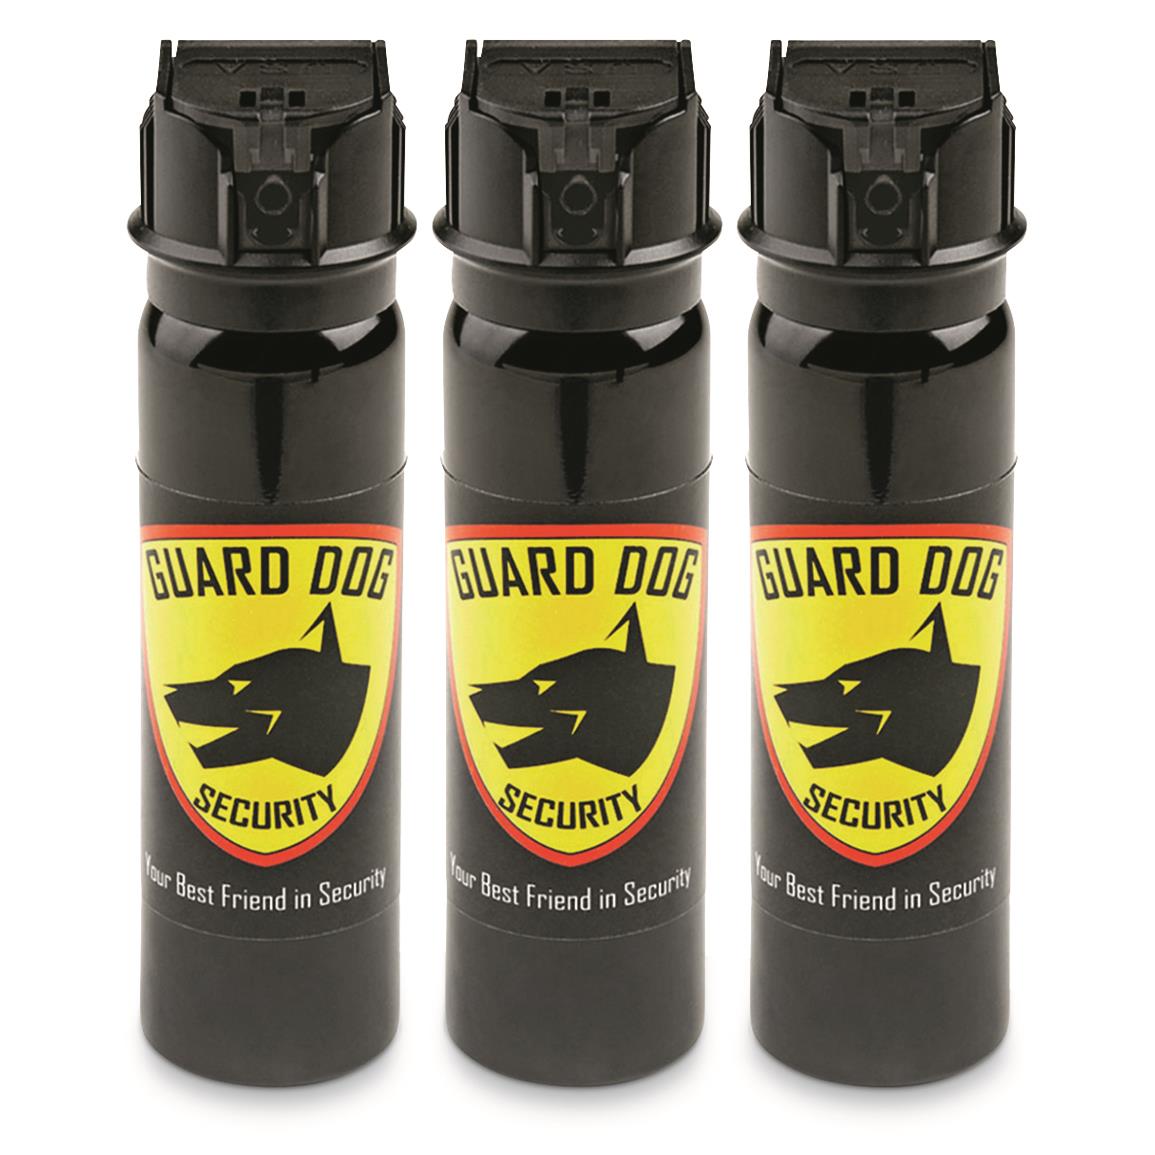 Guard Dog Flip Top Pepper Spray, 3 Pack of 4 oz. Canisters